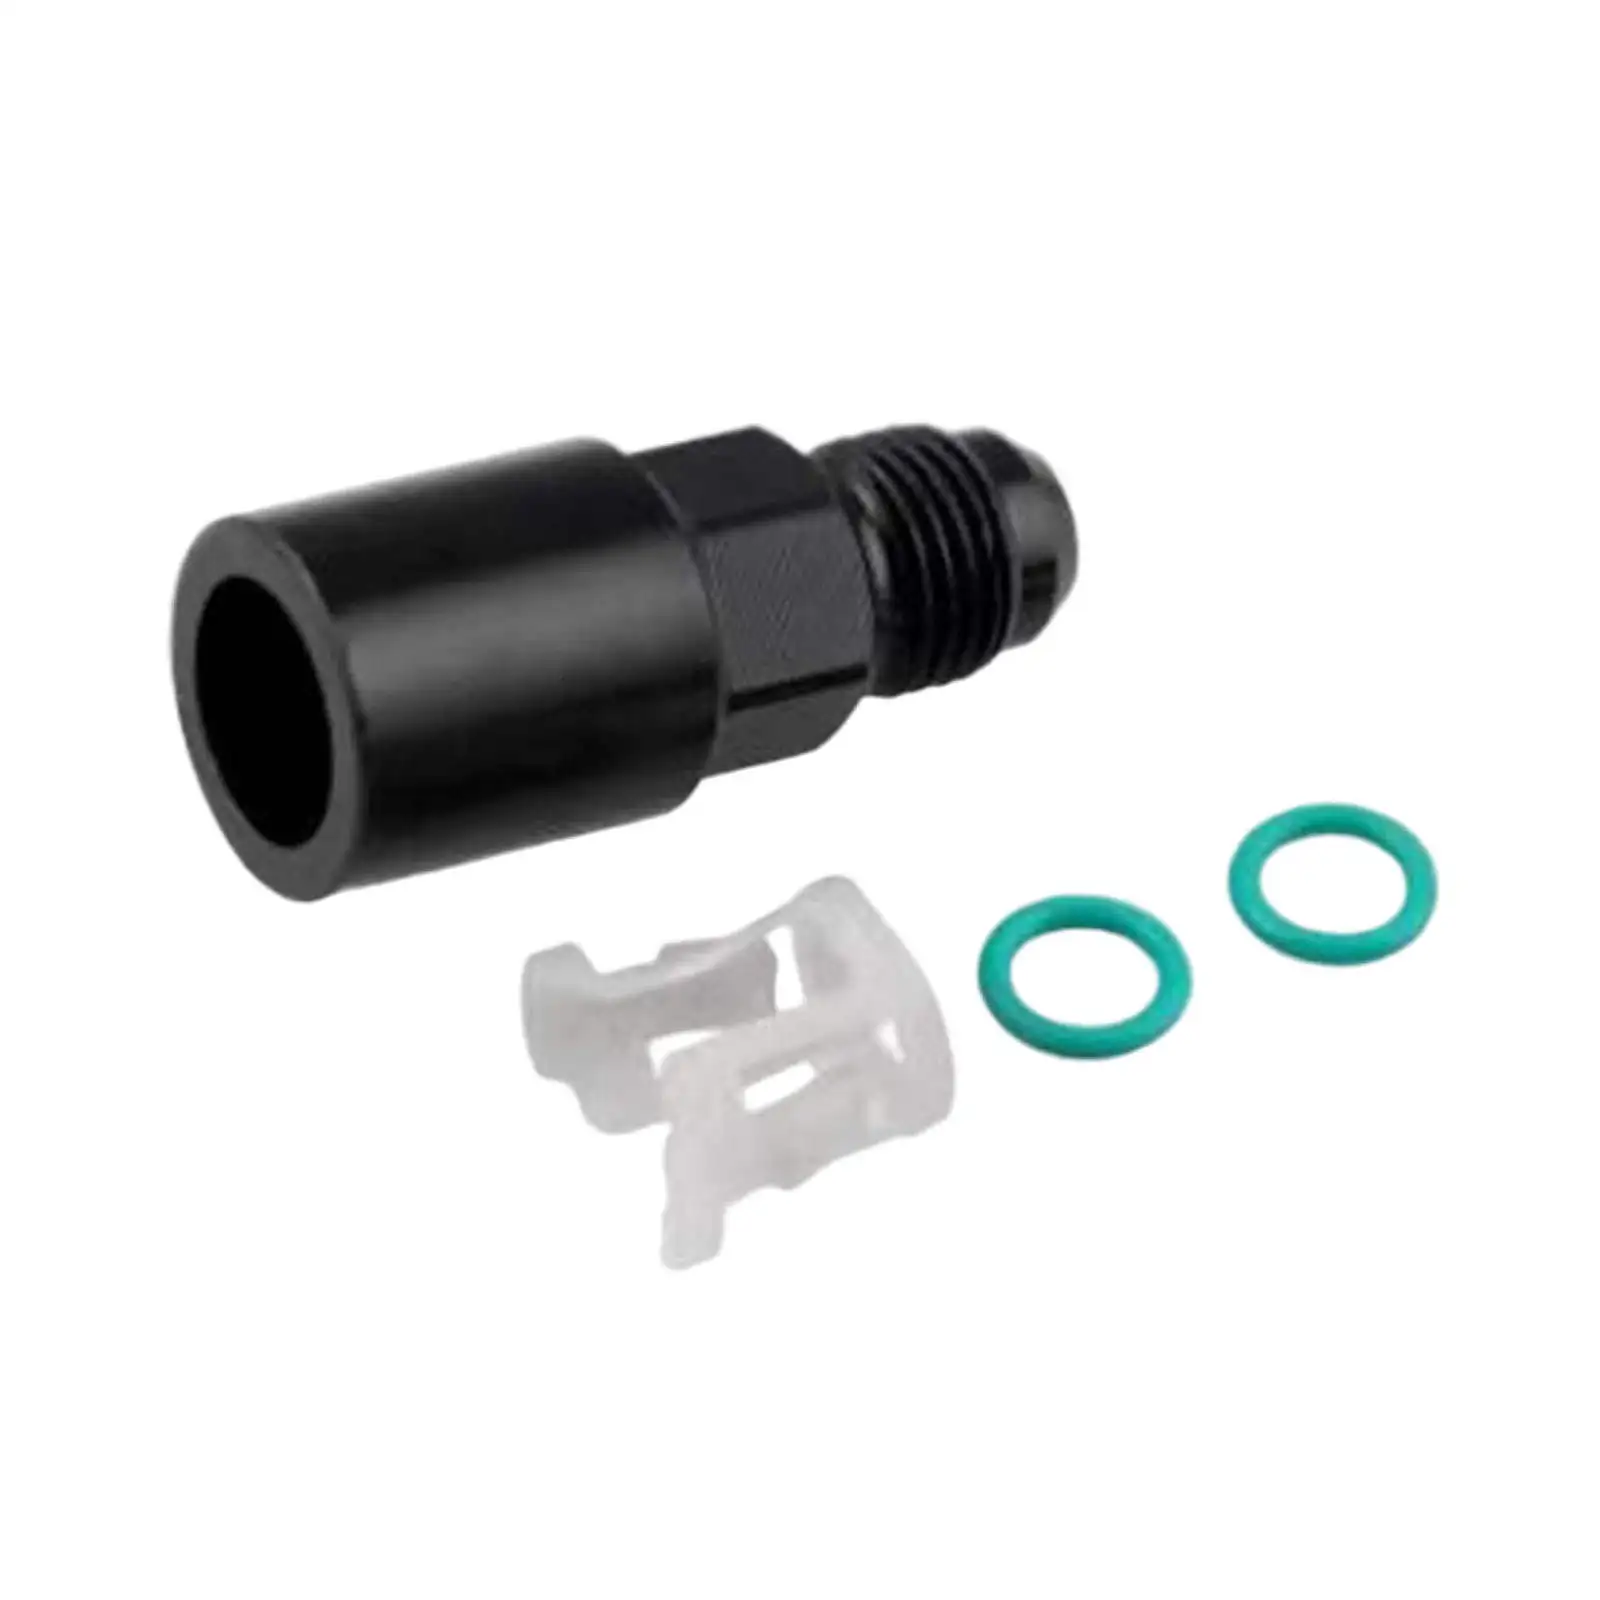 Fuel Adapter Fitting Fuel Distribution Pipe Joint Fit for Gas Fuel Oil Coolant Air